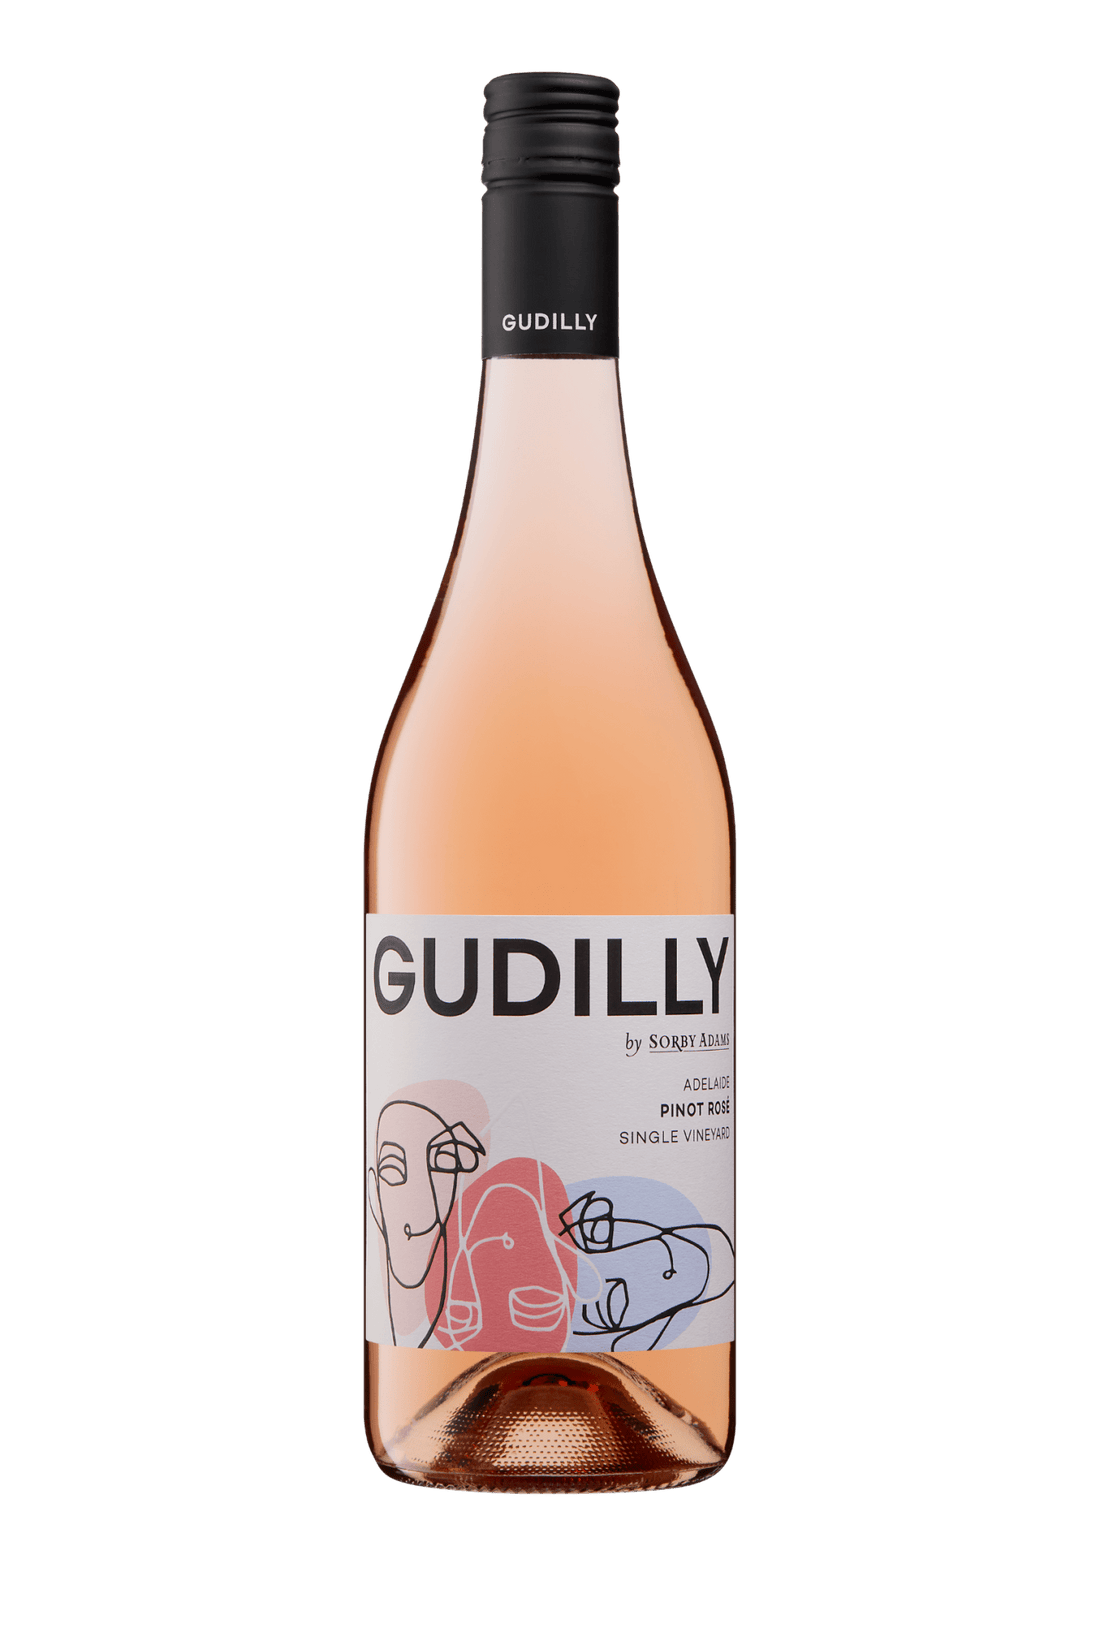 2022 Gudilly Adelaide Pinot Rosé - Pinot Rosé - Sorby Adams Wines